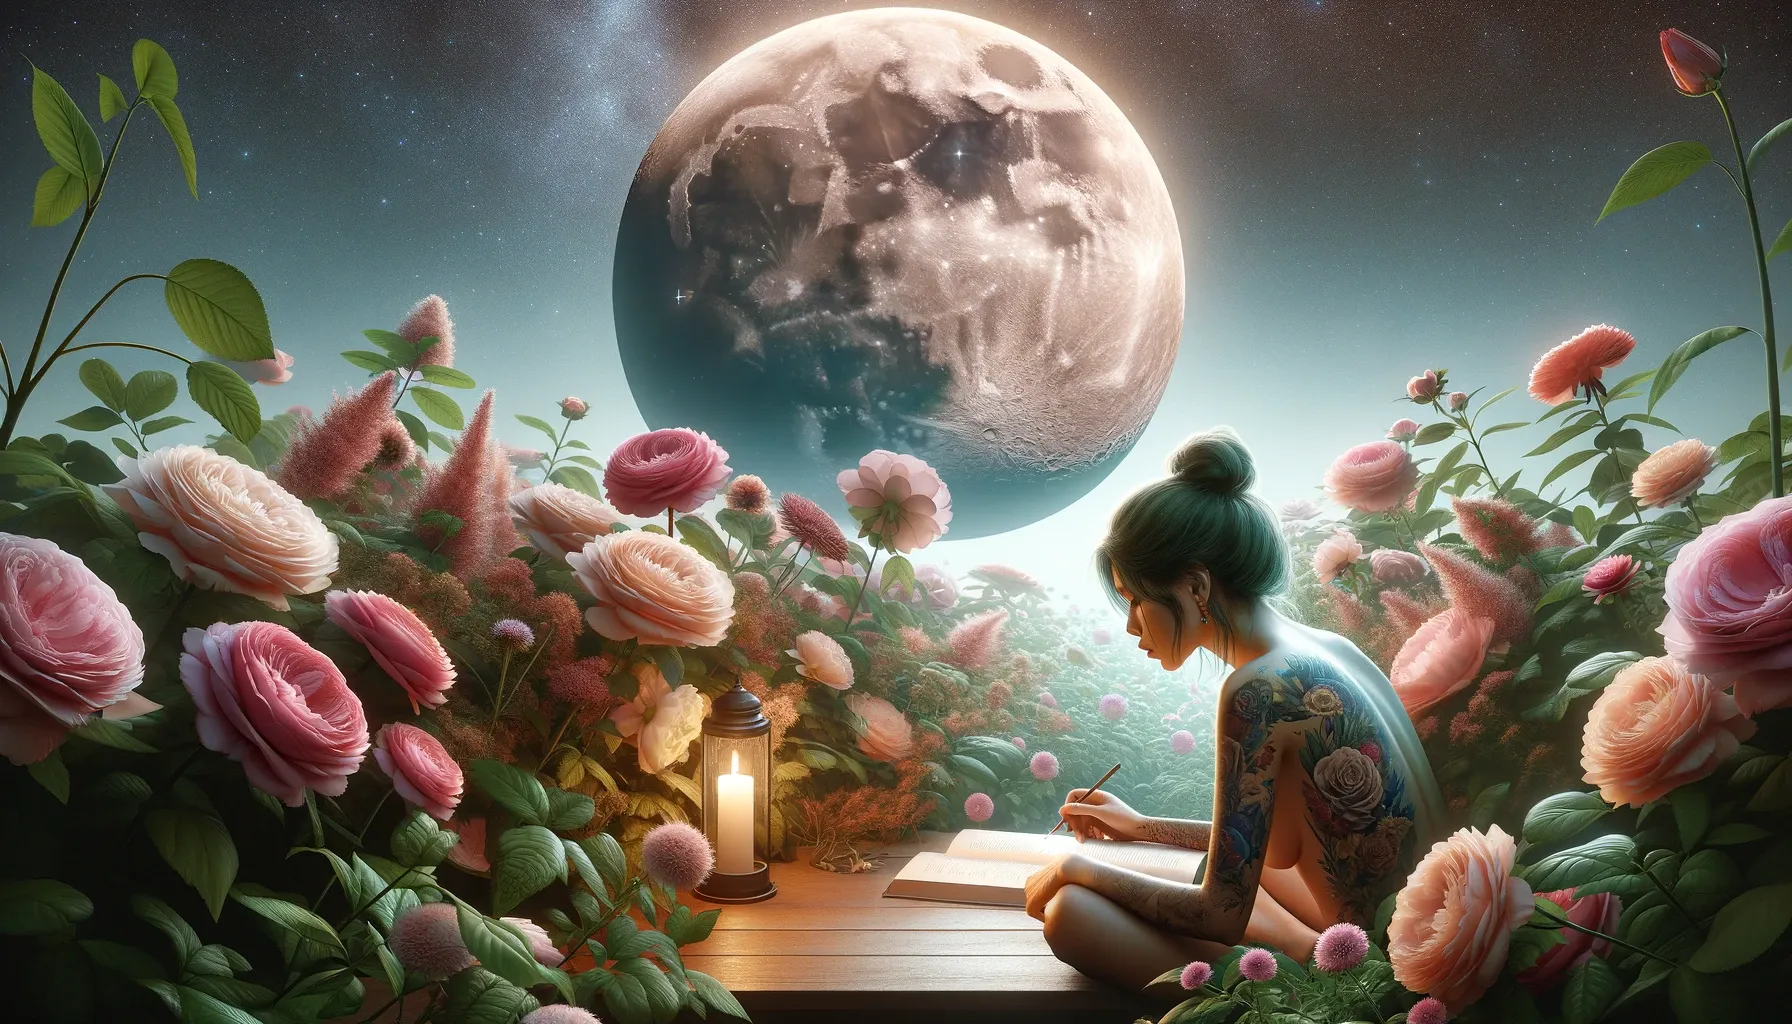 A woman is journaling in a field of flowers that are pink and green in front of the Waxing Gibbous Moon.